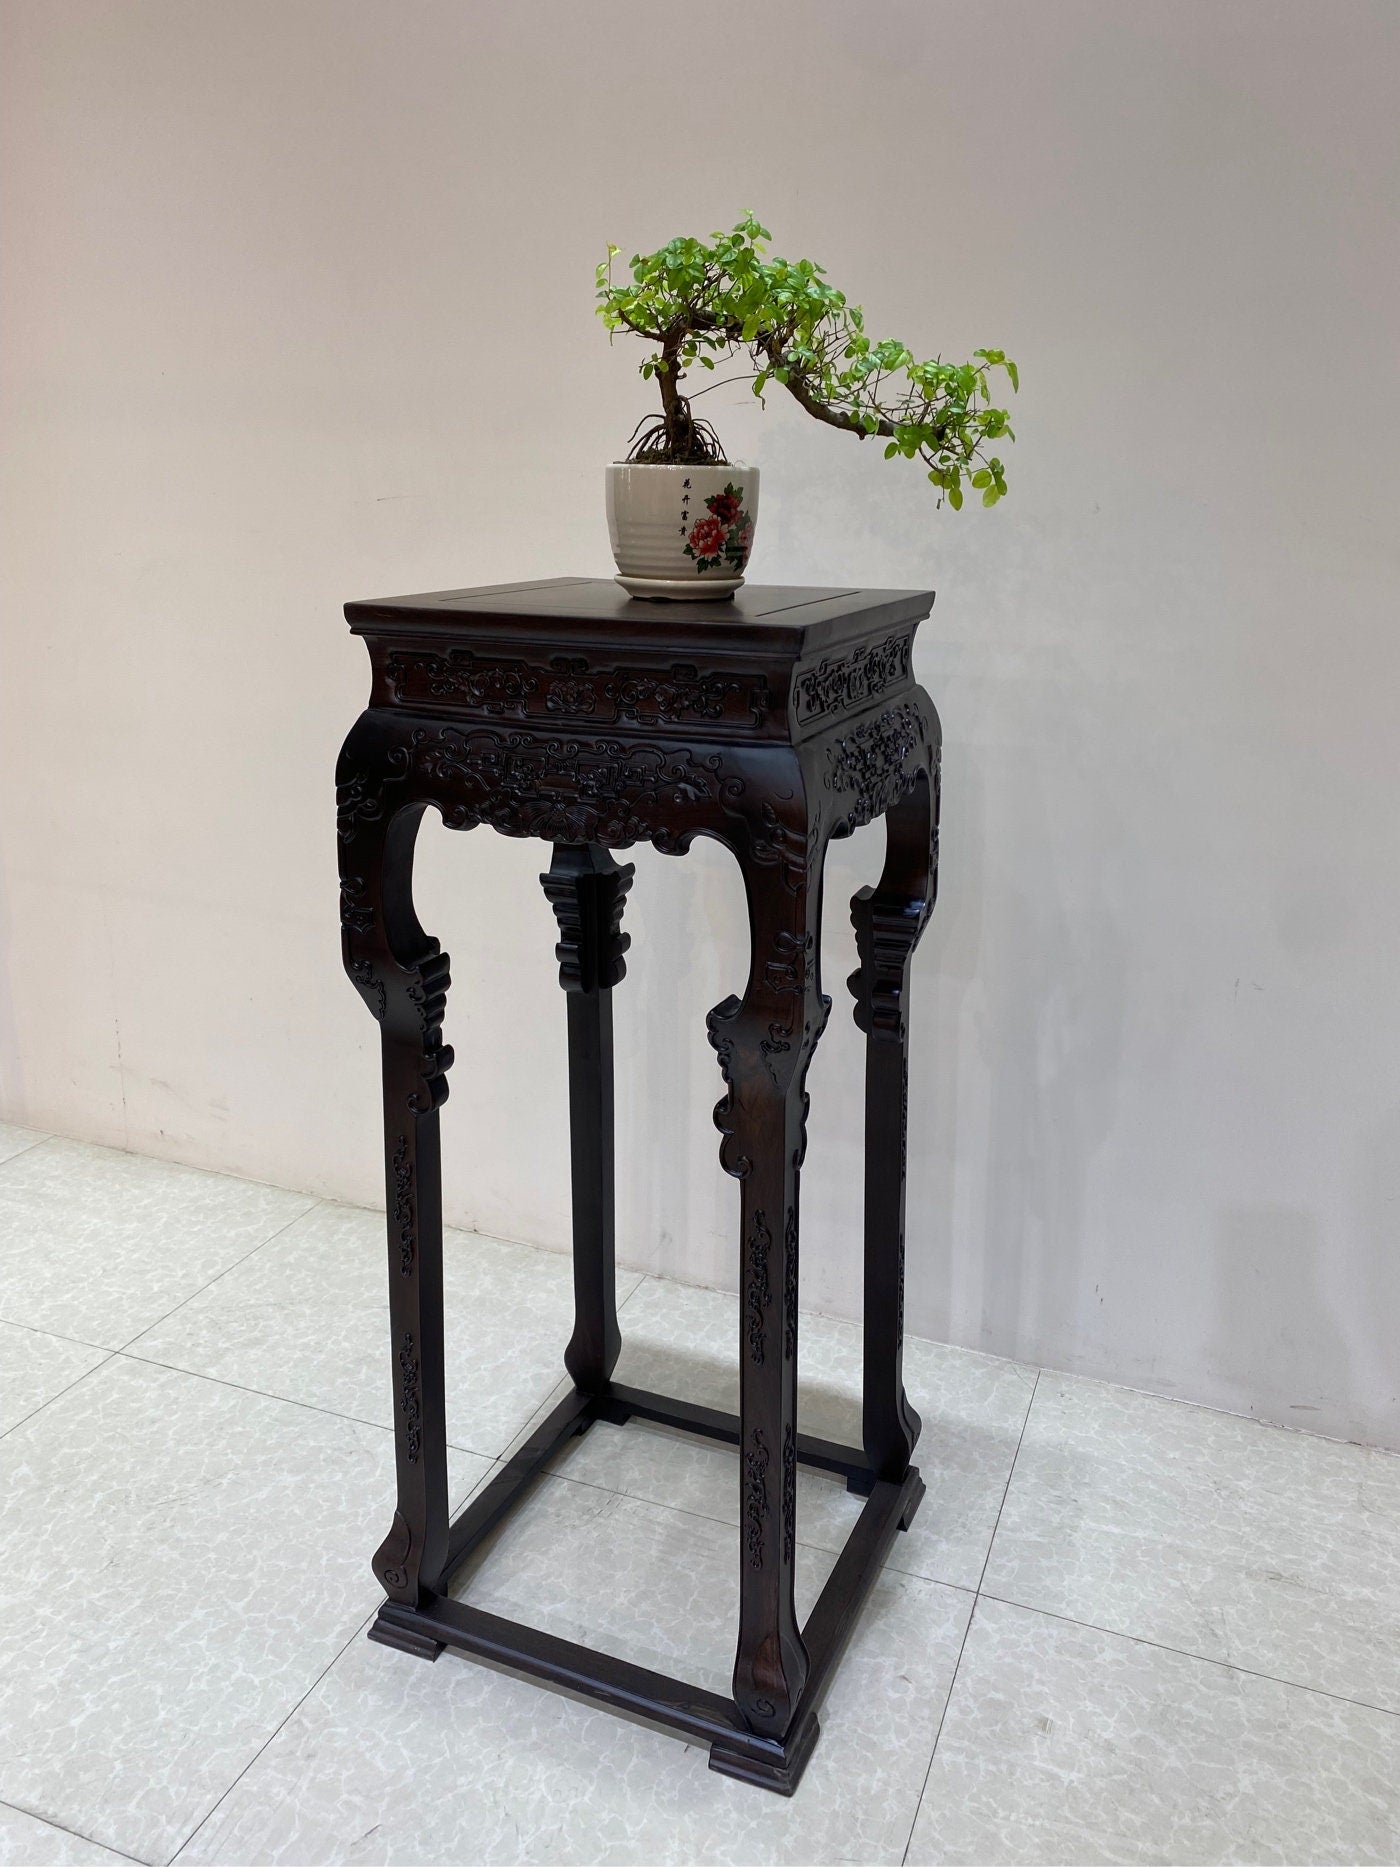 beautiful carving wood Accent Stool, carving Plant Stand, mid century modern style, handmade plant stand - SlabstudioHongKong